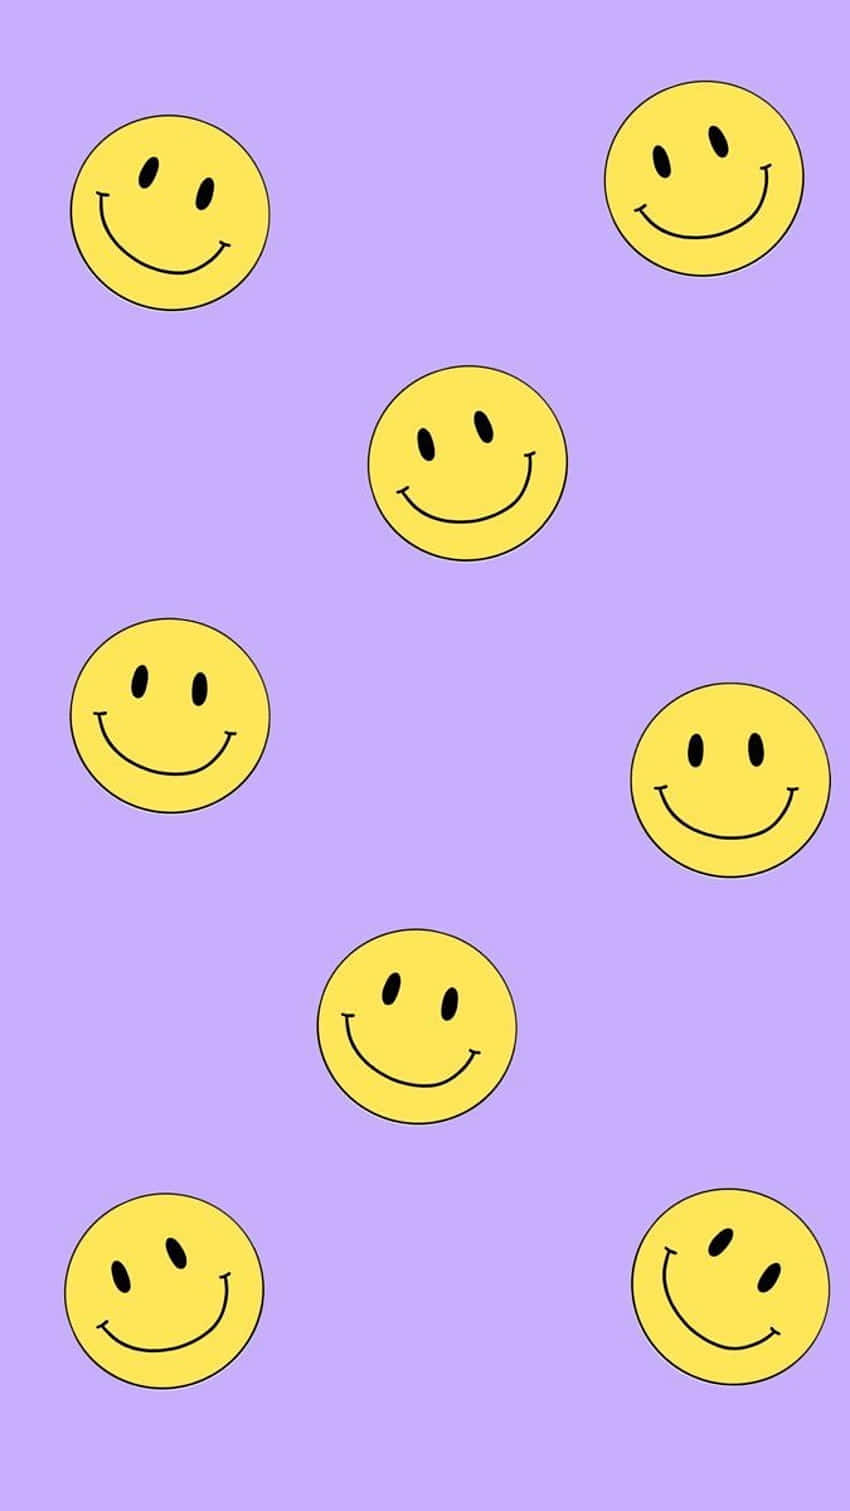 Purple Background Yellow Smiley Faces Wallpaper